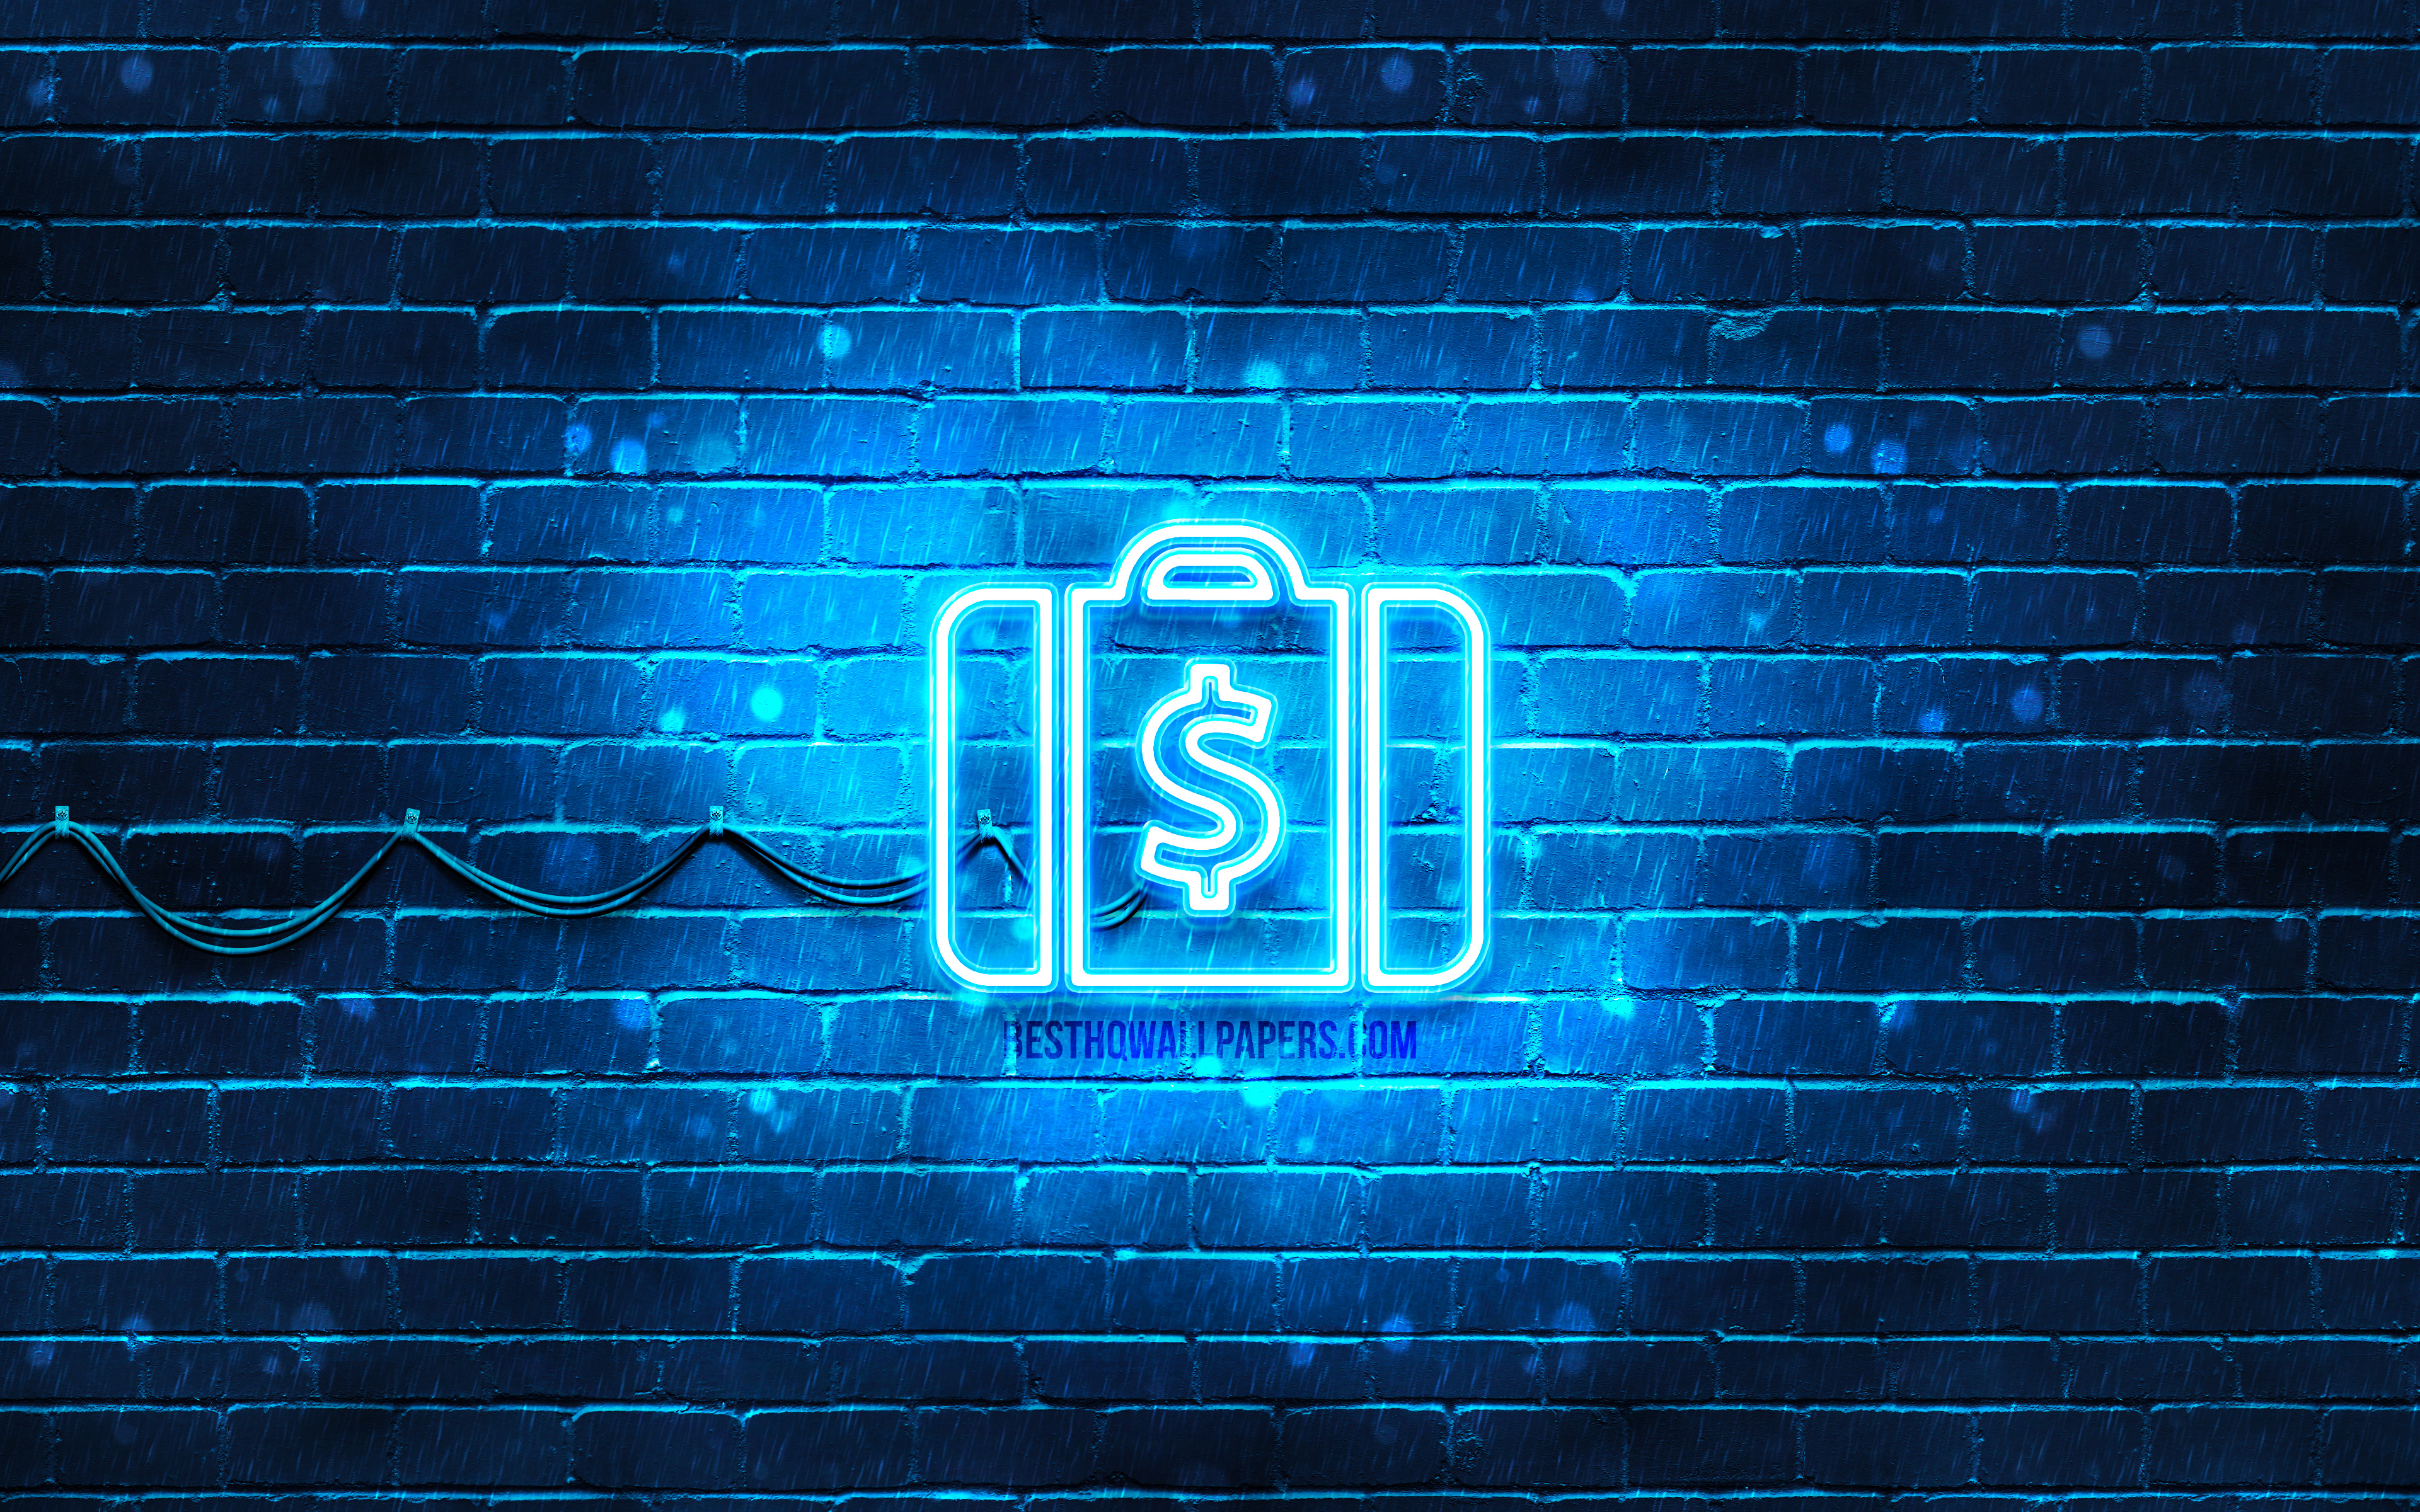 Download wallpaper Case with money neon icon, 4k, blue background, neon symbols, Case with money, neon icons, Case with money sign, financial signs, Case with money icon, financial icons for desktop with